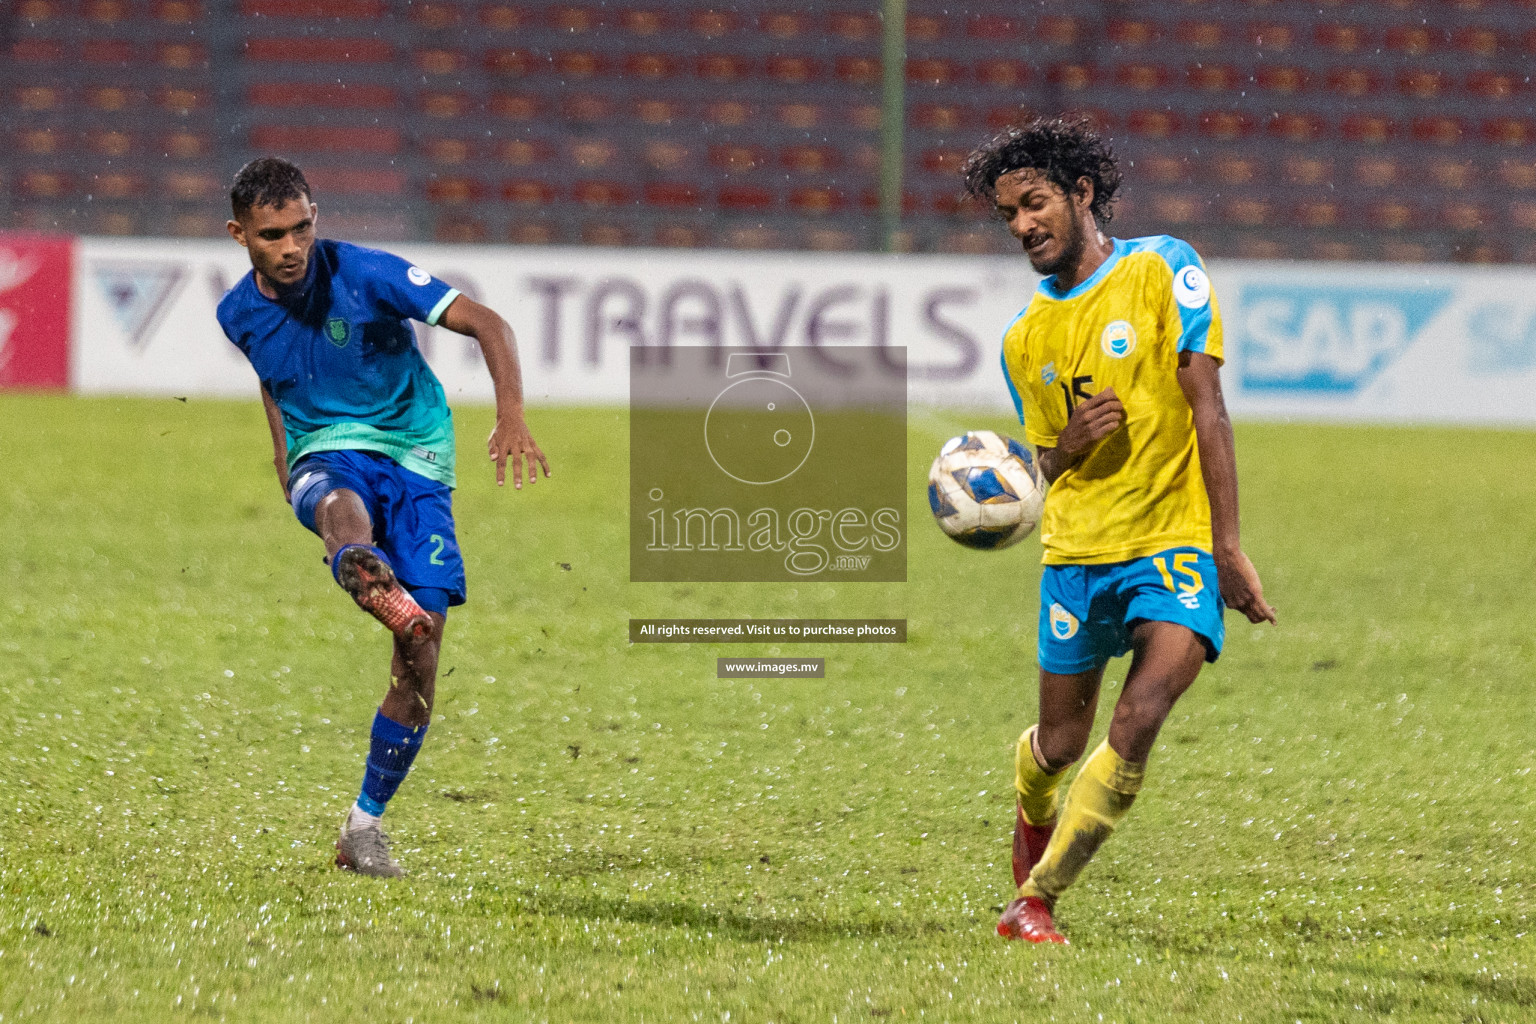 Club Valenca vs Super United Sports in Ooredoo Dhivehi Premier League 2021/22 held on 02 July 2022 in National Football Stadium, Male', Maldives